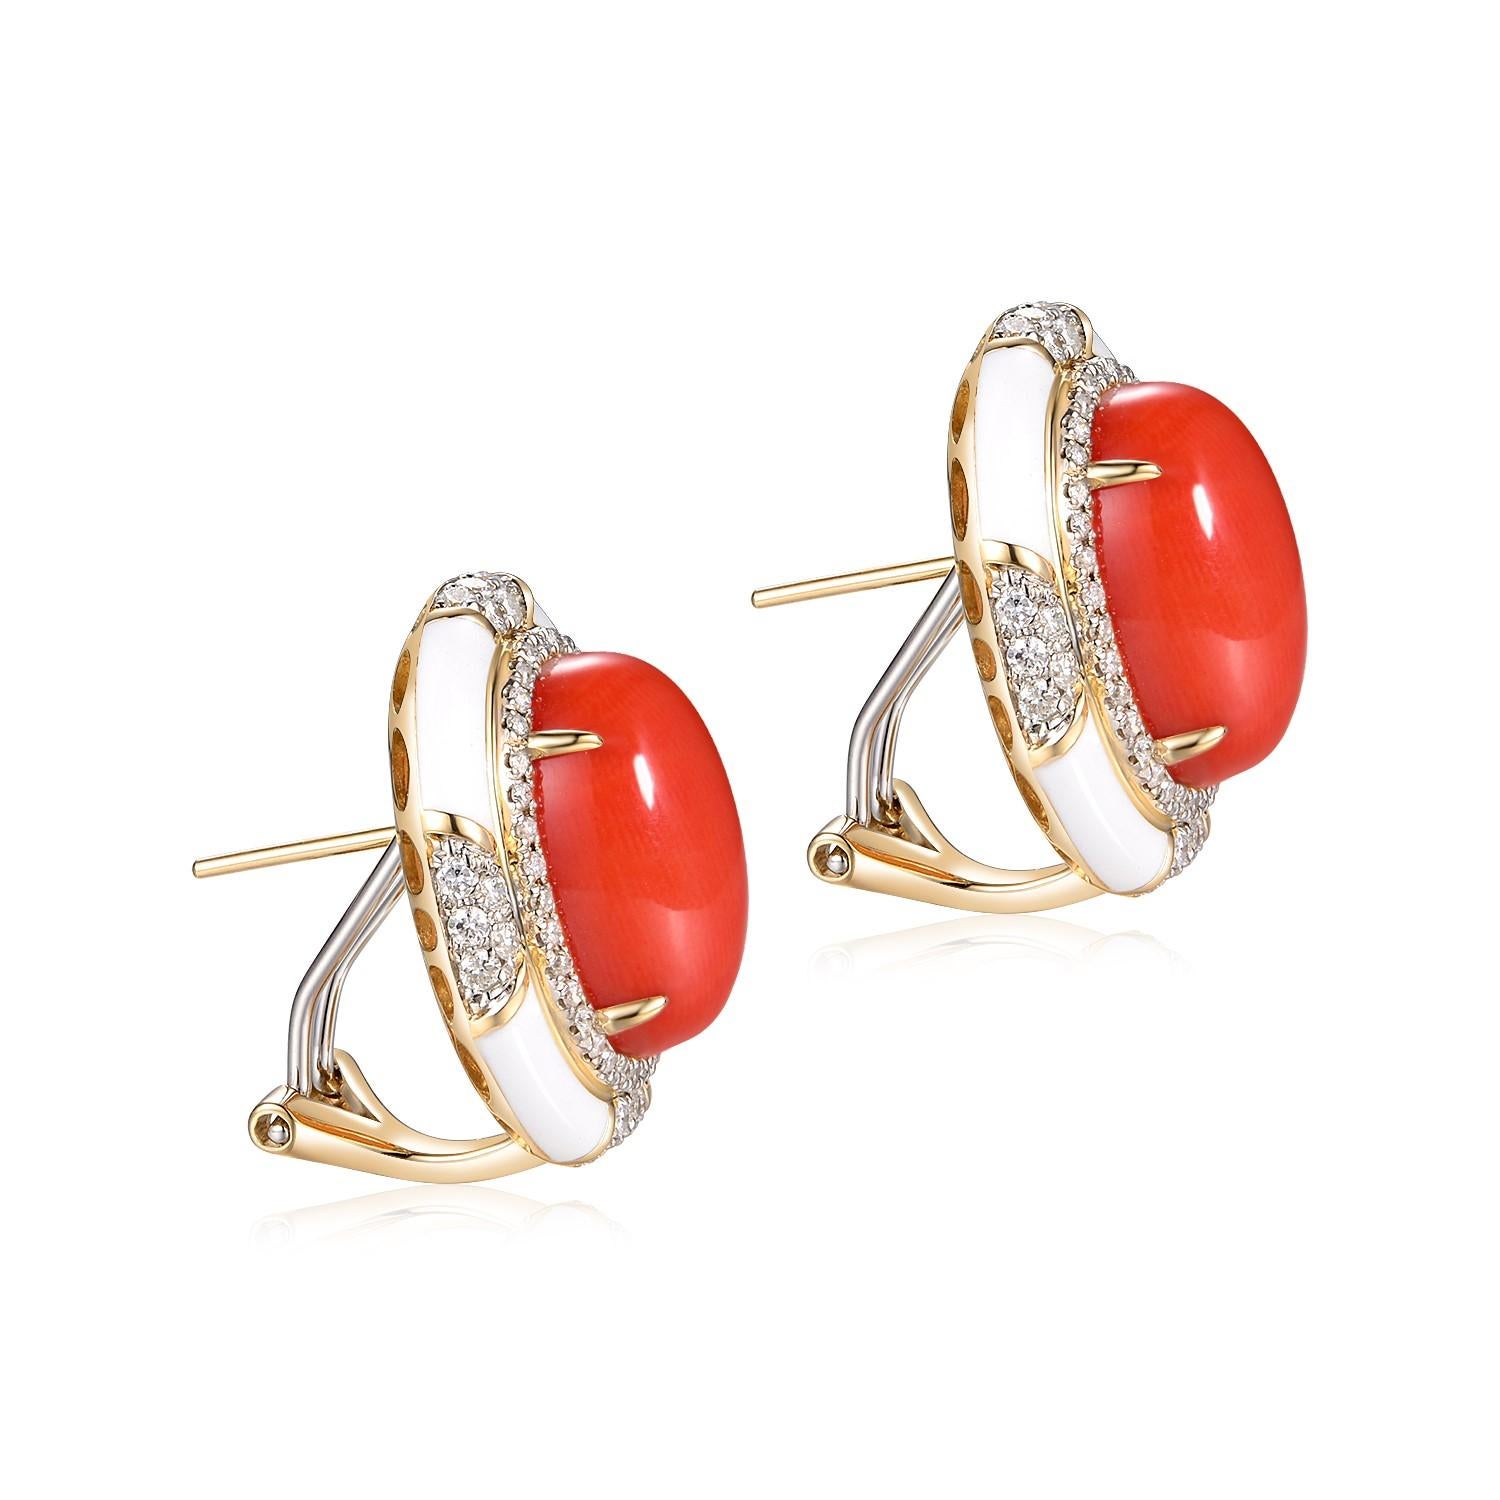 The Salmon Color Coral Diamond Enamel Earrings, set in 14 Karat Yellow Gold, are an exquisite testament to timeless elegance and craftsmanship. The central focus of each earring is the luminescent coral stone, weighing an impressive 12.0 carats. The